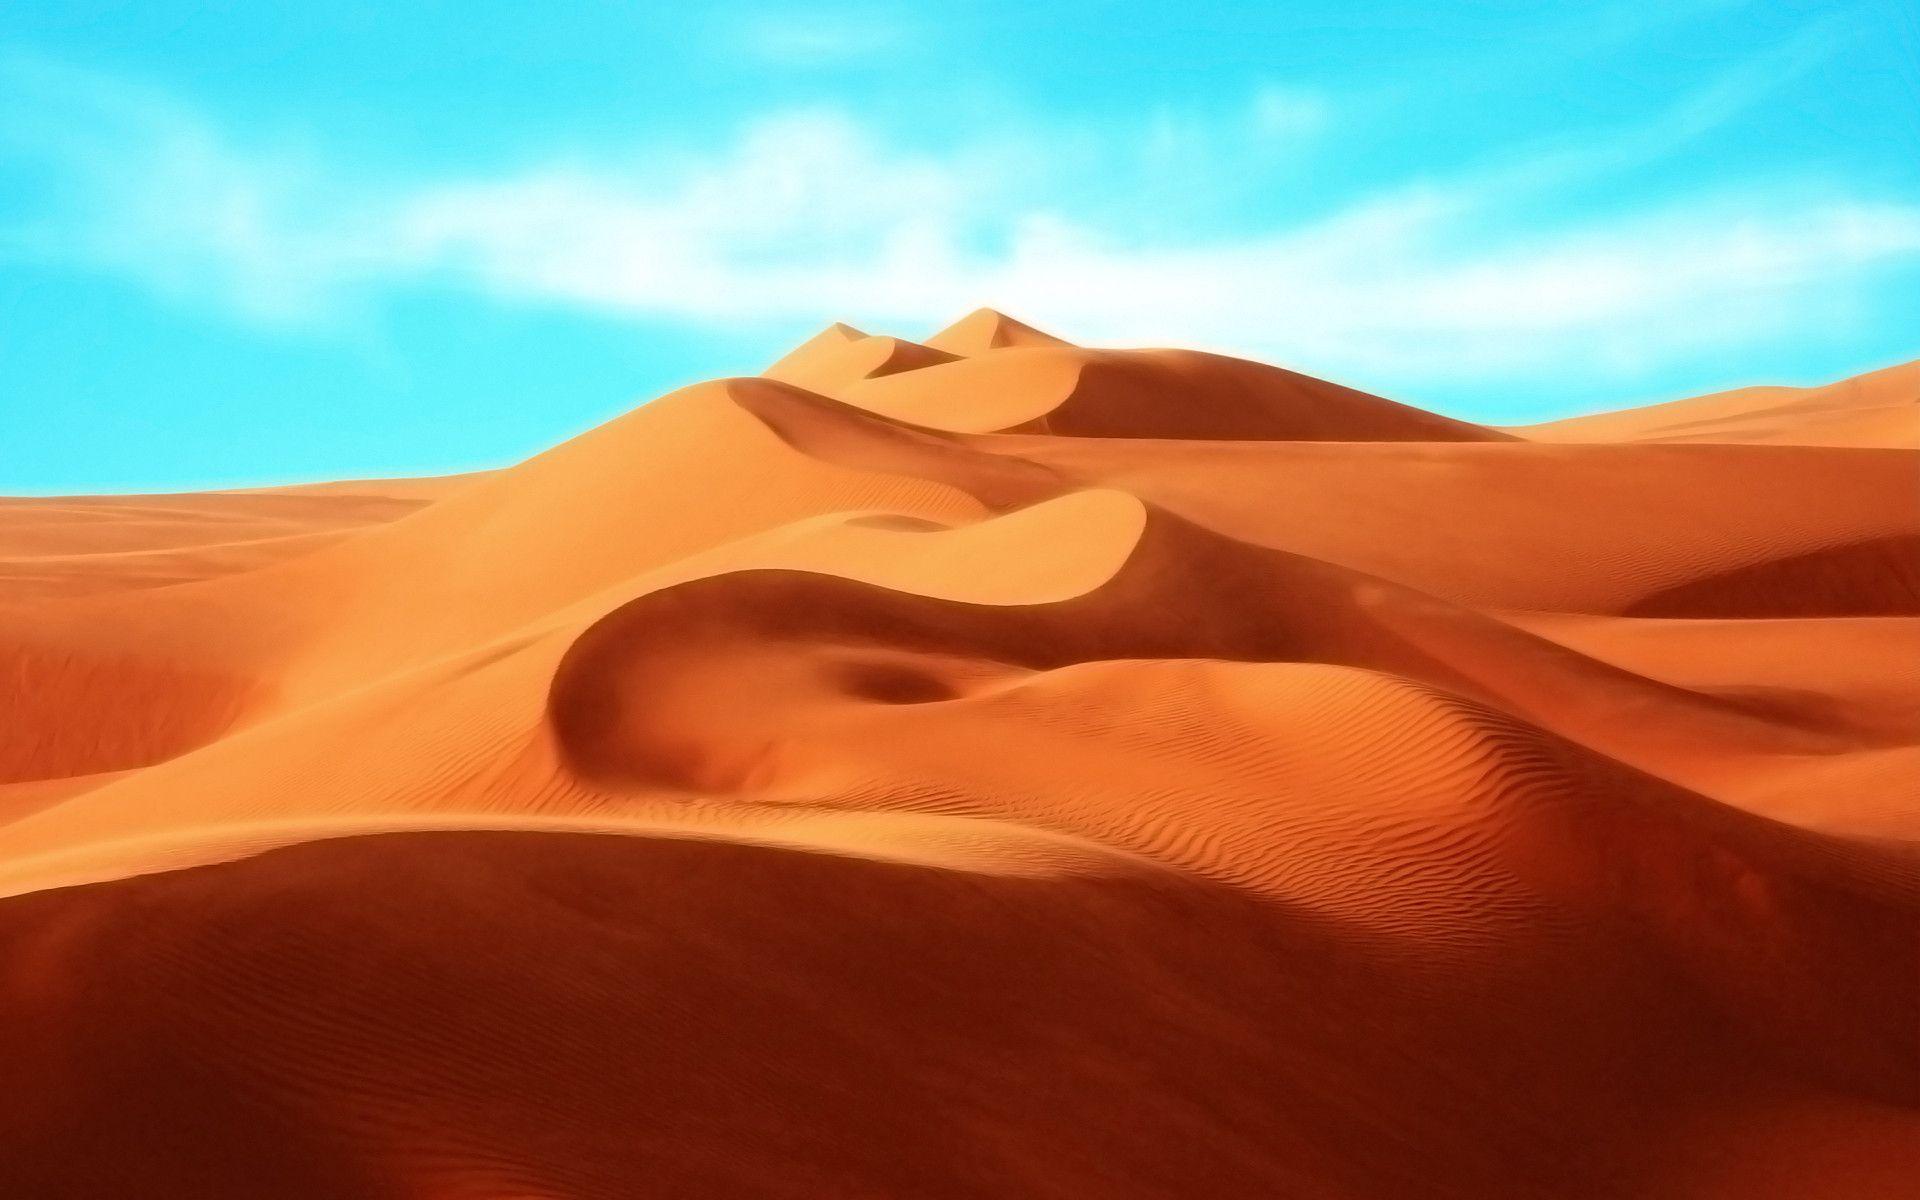 Desert Sand Dune wallpaper and image, picture, photo